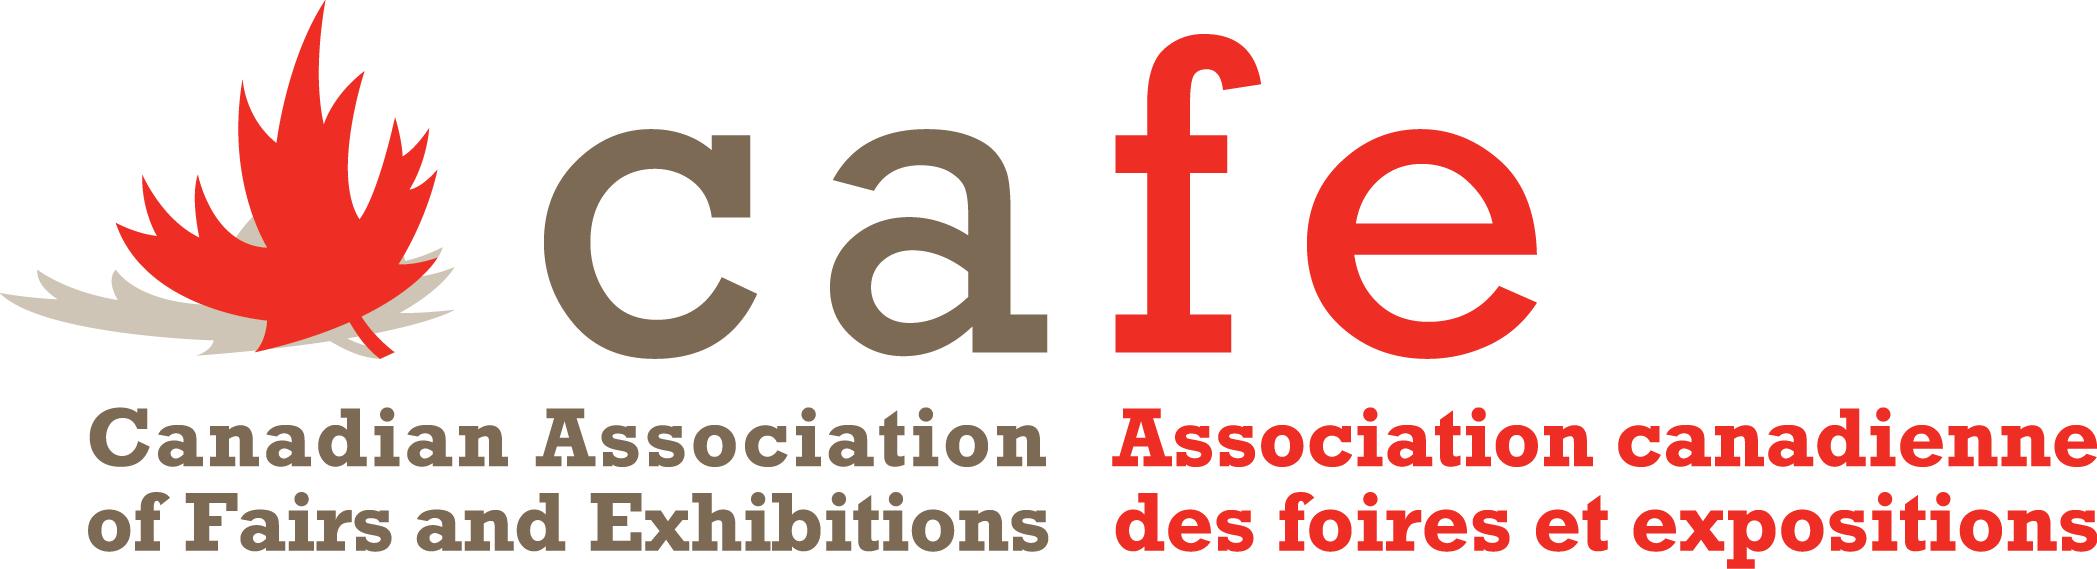 Canadian Association of Fairs and Exhibitions